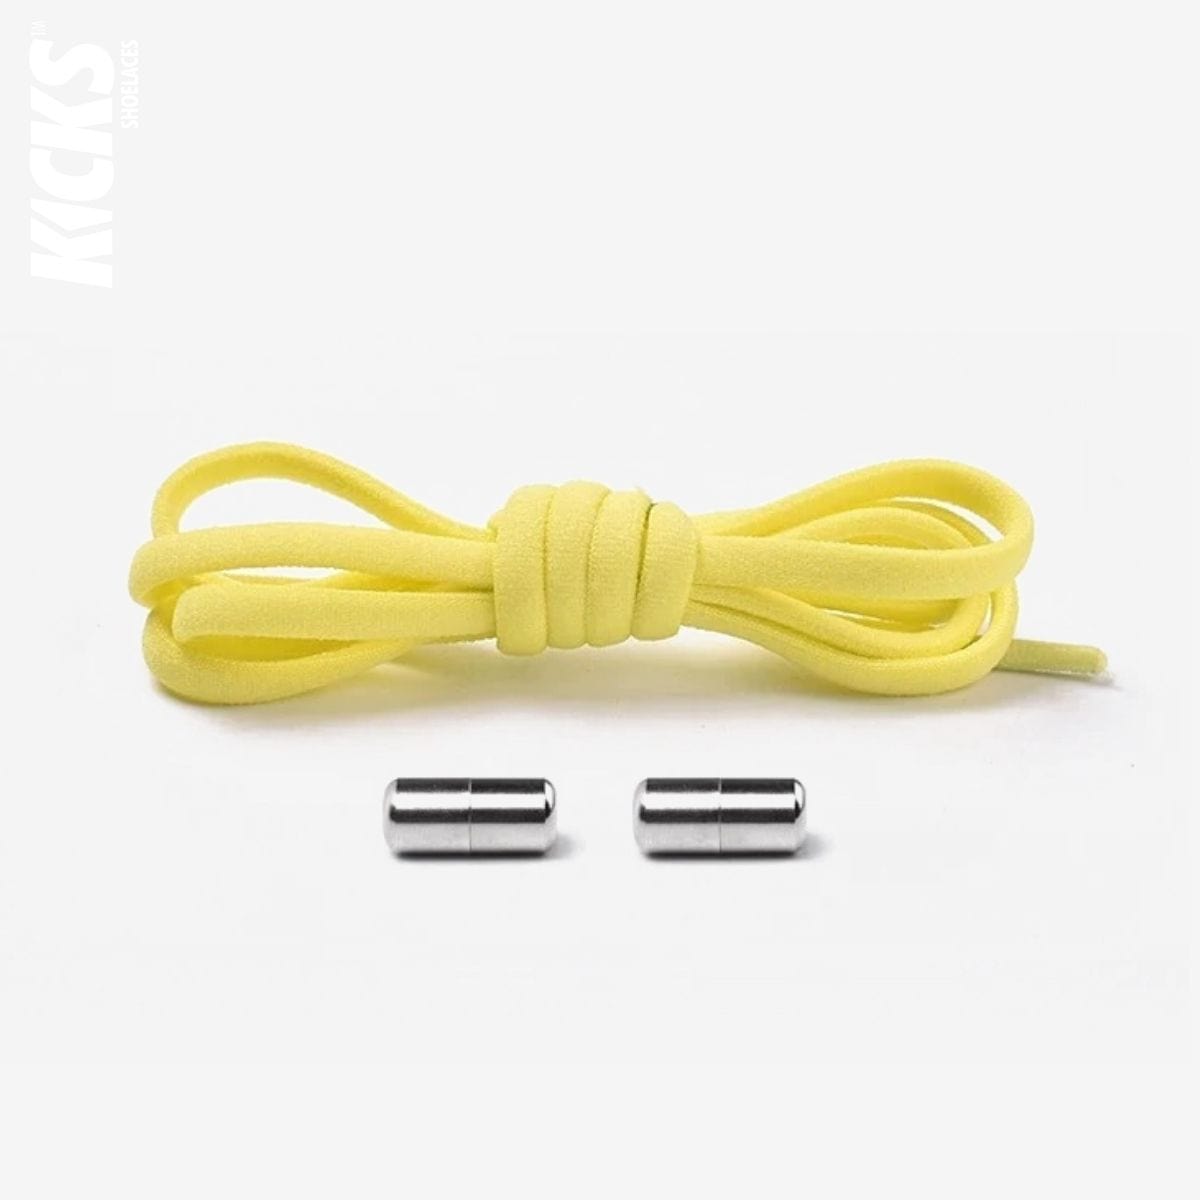 fluorescent-yellow-kids-elastic-no-tie-shoe-laces-for-sneakers-by-kicks-shoelaces